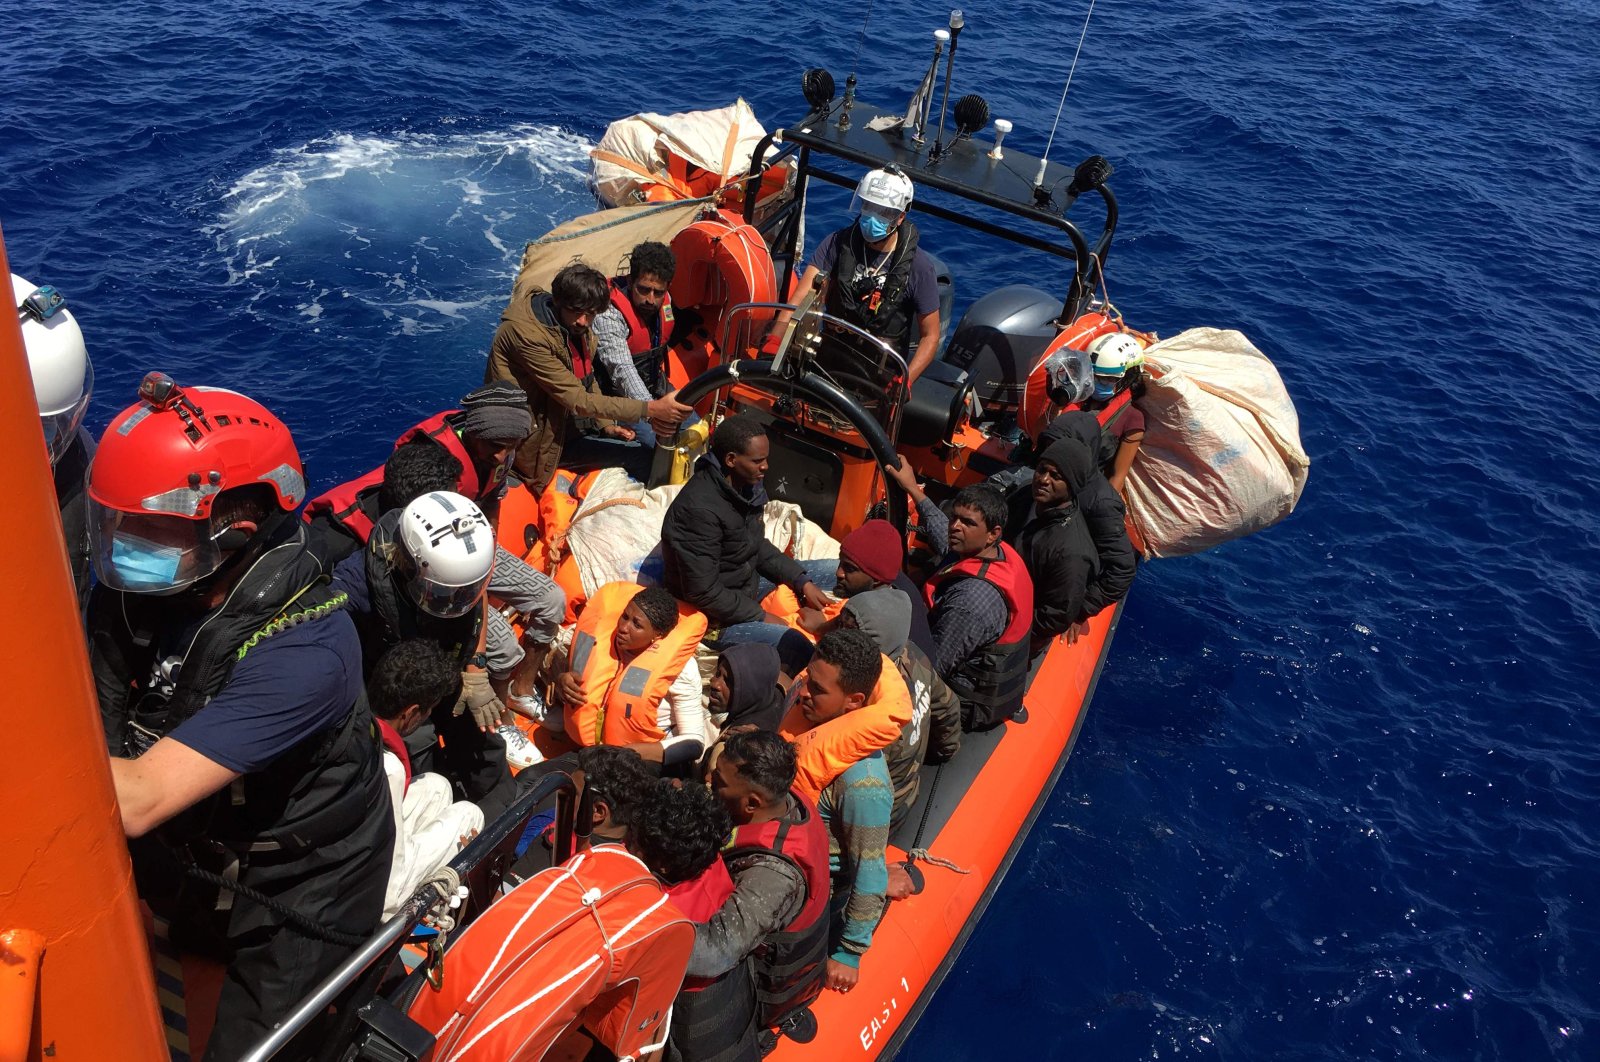 Some of the 51 migrants, who were drifting on a wood boat, are rescued by members of the French NGO SOS Mediterranee's boat Ocean Viking, off the coast of Lampedusa island, June 25, 2020. (AFP Photo)